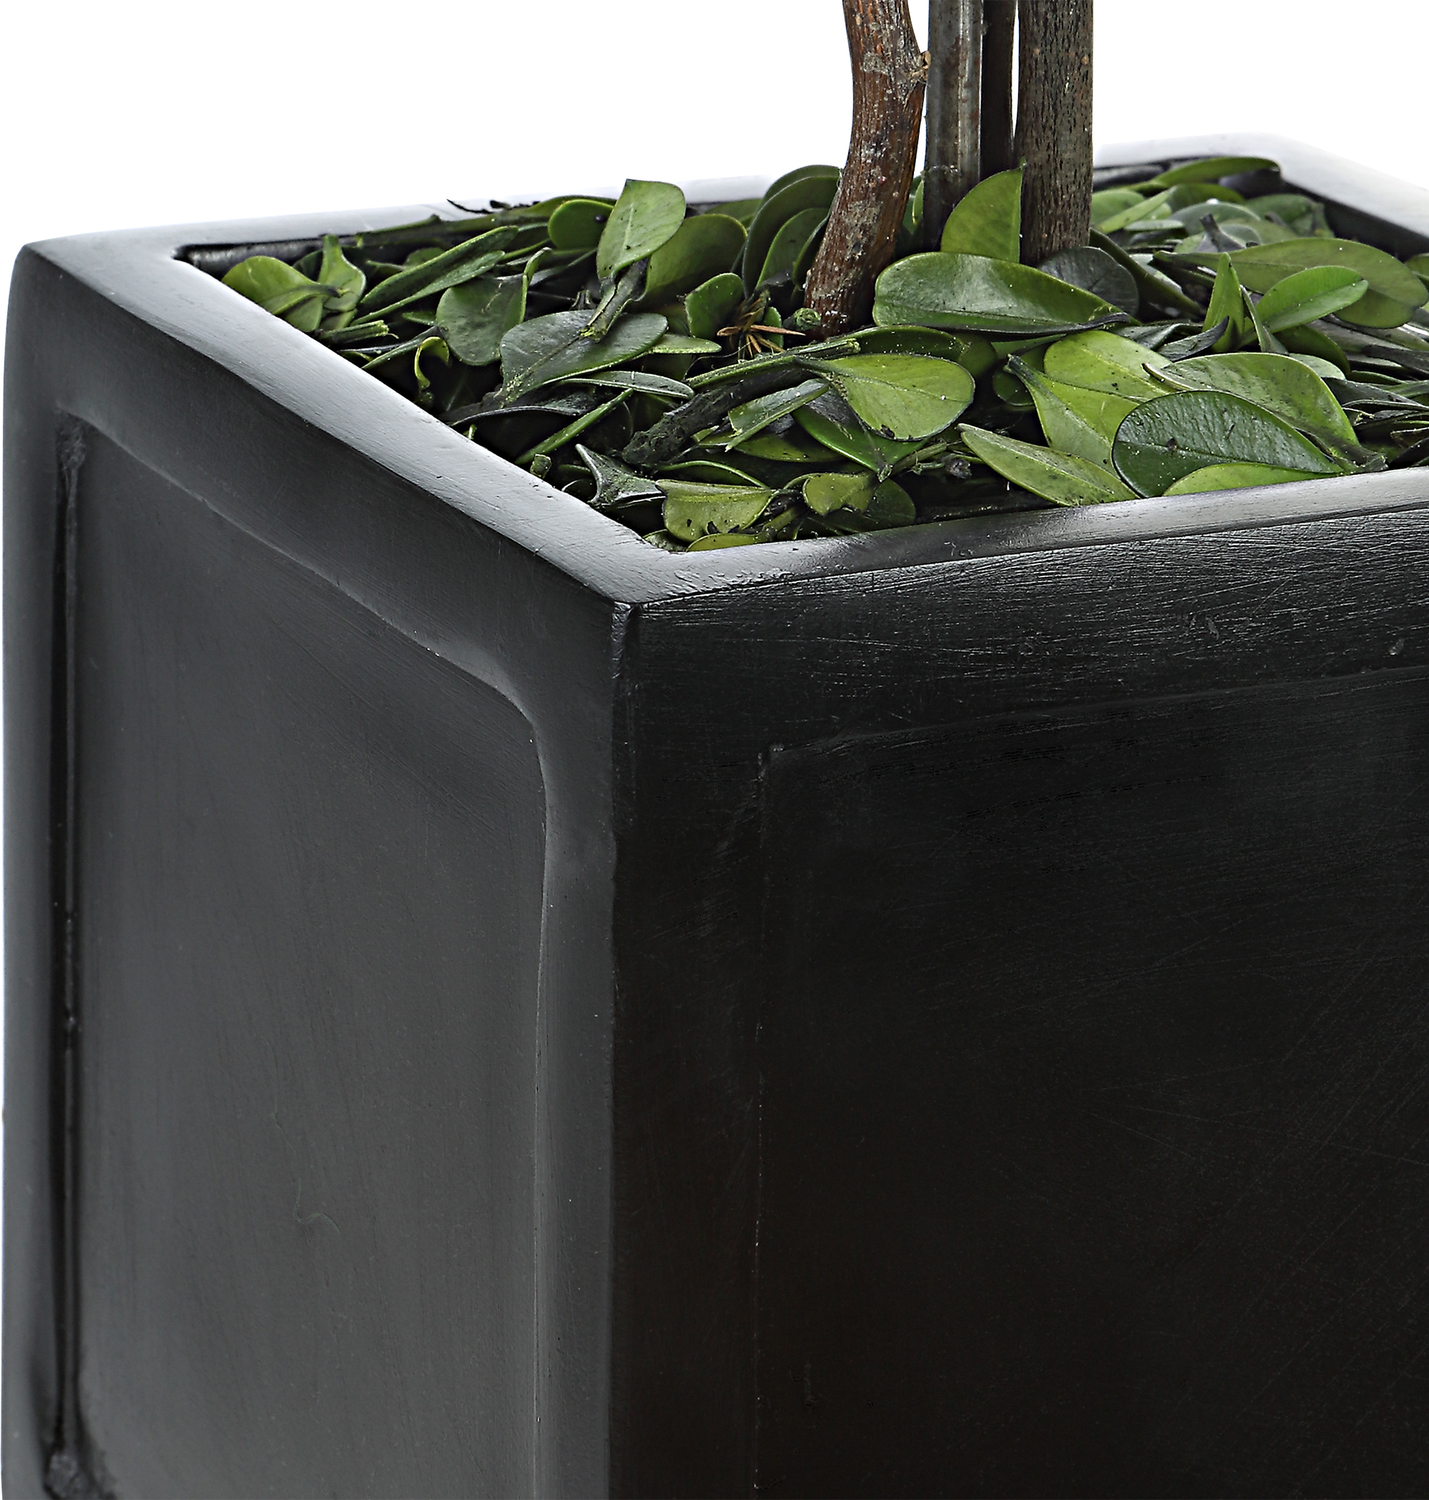 nice flower pots Uttermost Trees-Greenery Natural Evergreen Foliage Preserved While Freshly Picked, Looks And Feels Like Living Boxwood. Supported By Natural Willow Branches, Two Square Topiaries Are Potted In Contemporary Ball Footed Planters Finished In Satin Black. For Indoor Use Only.